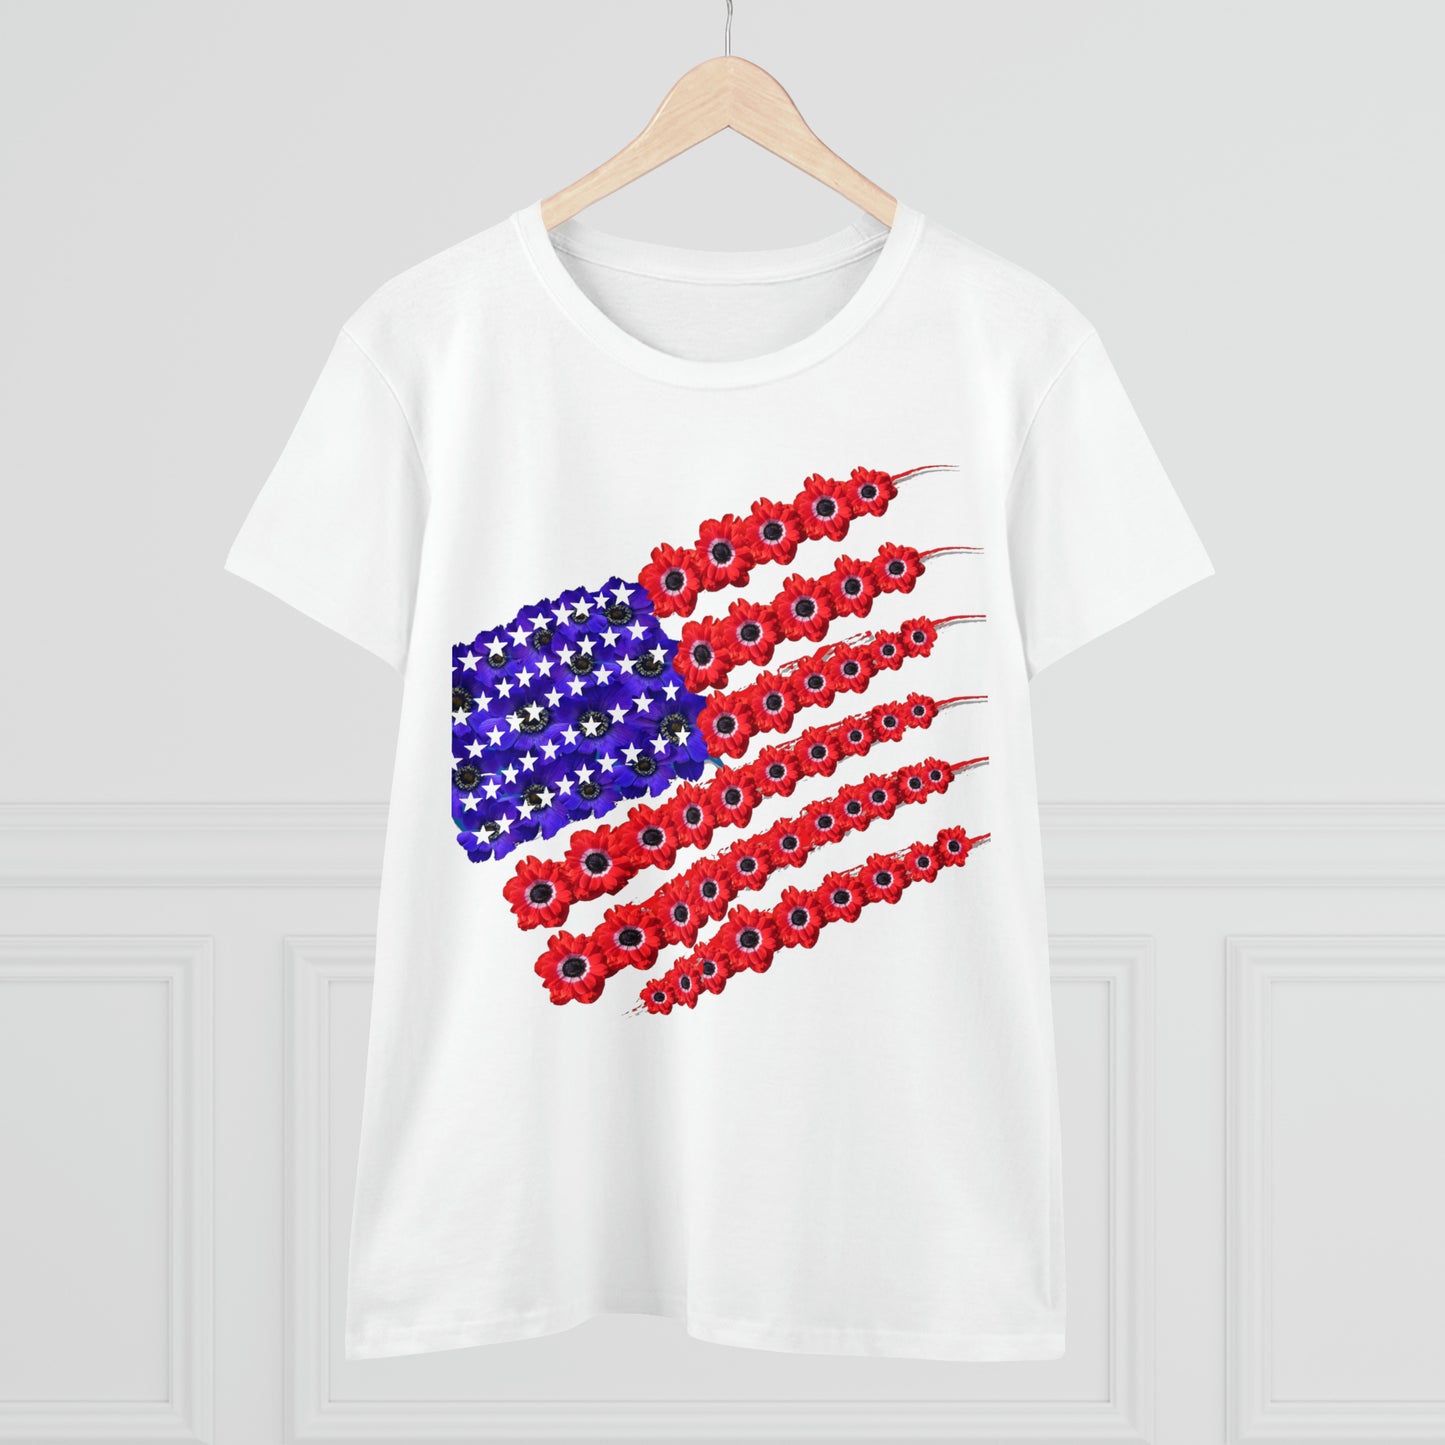 Celebrating Labor Day - Women's Midweight Cotton Tee